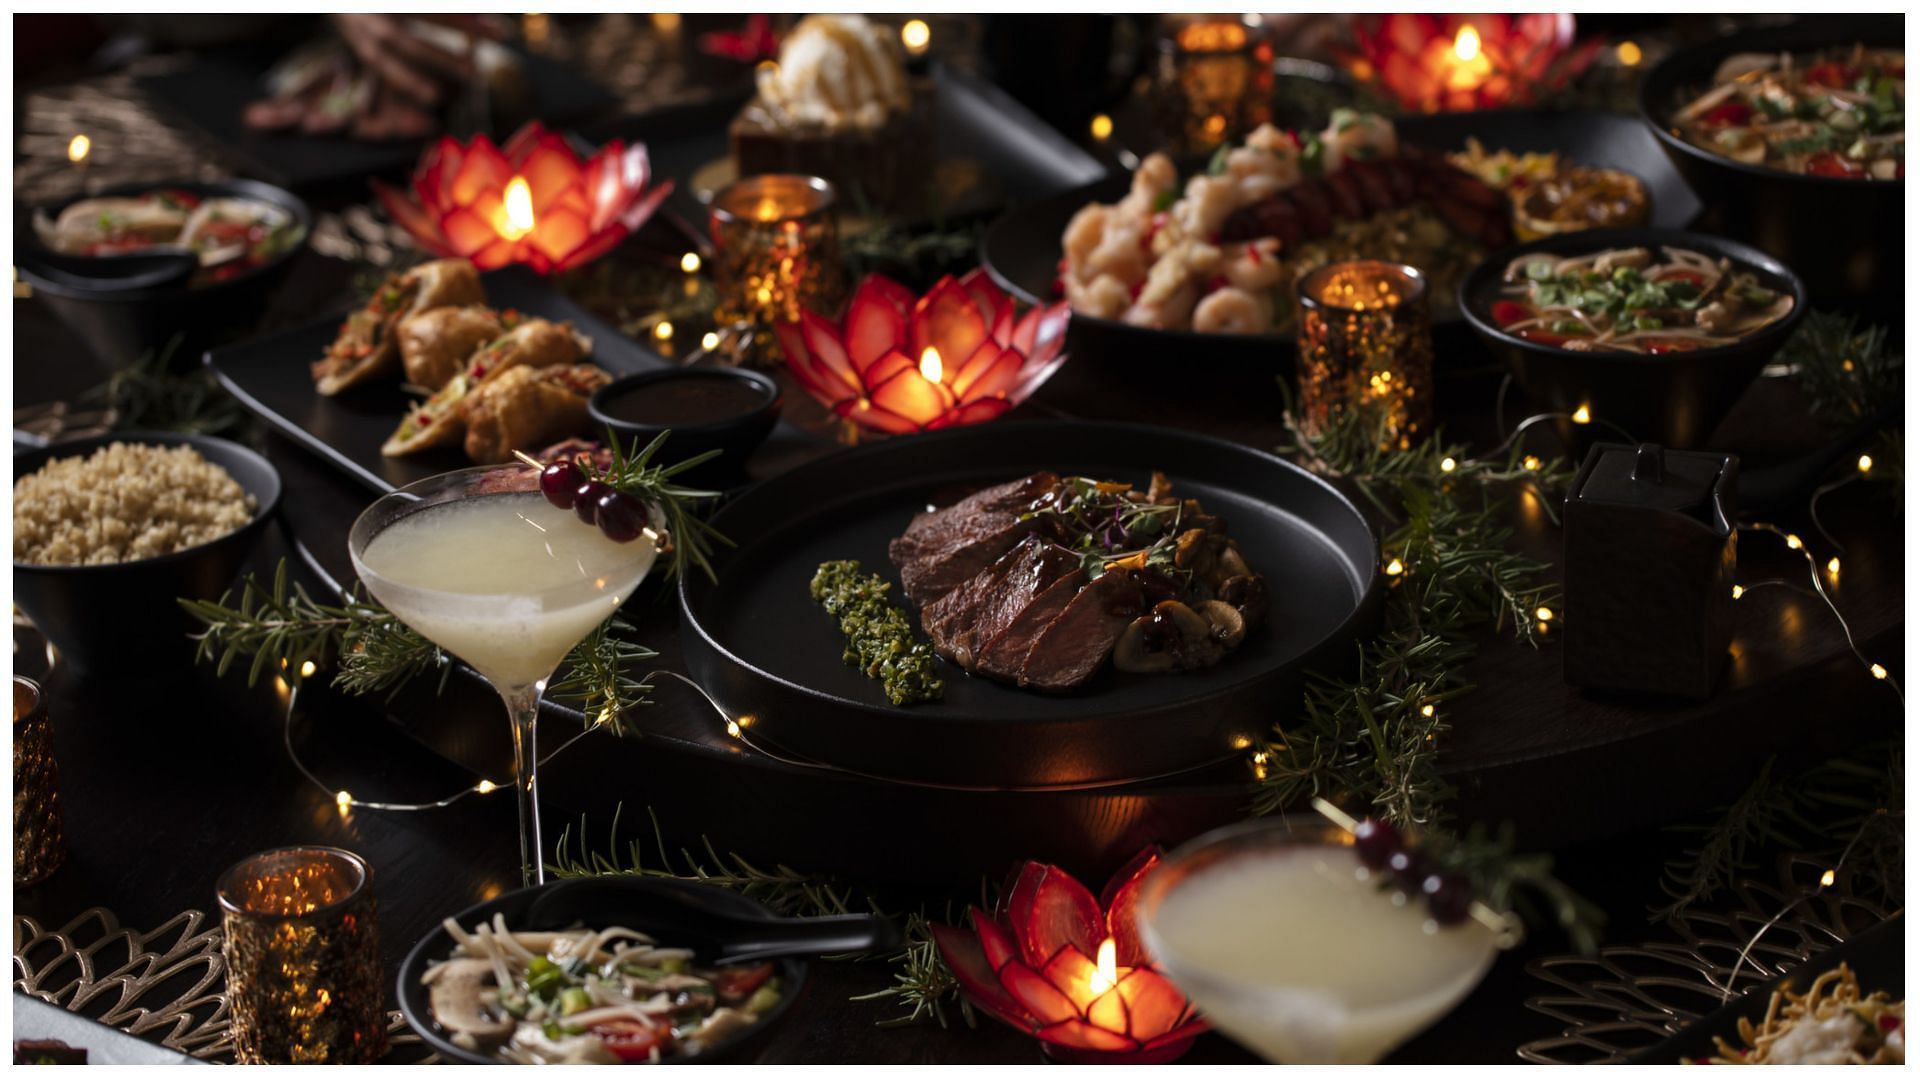 P.F. Chang&rsquo;s new holiday menu (Image via P.F. Chang&rsquo;s)